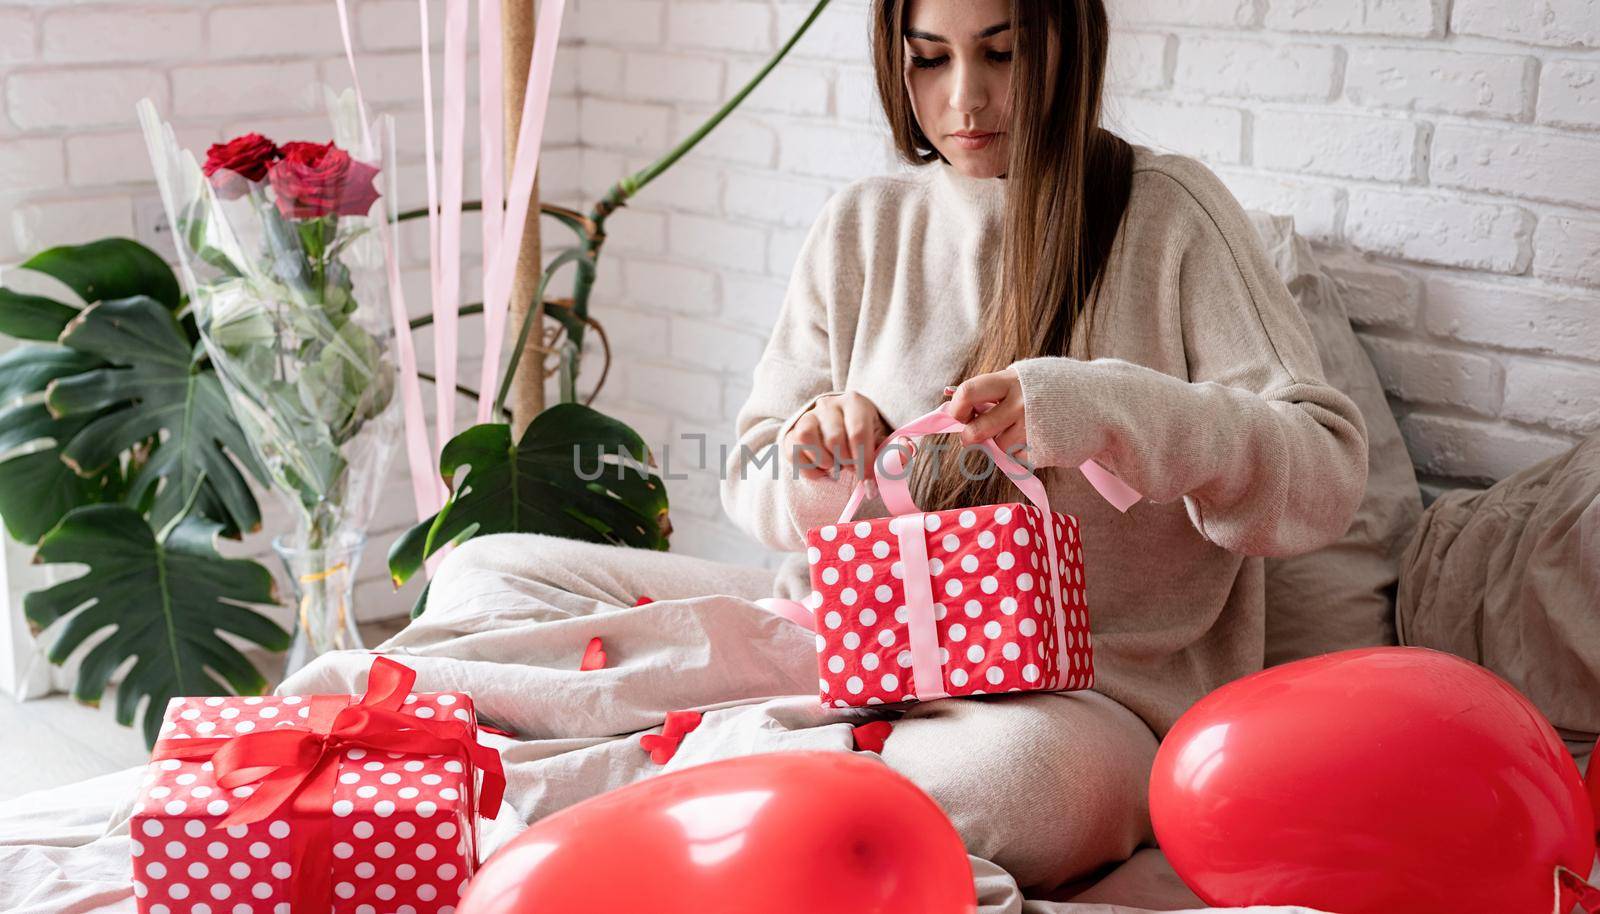 Young funny woman sitting in the bed celebrating valentine day wrapping the gifts by Desperada